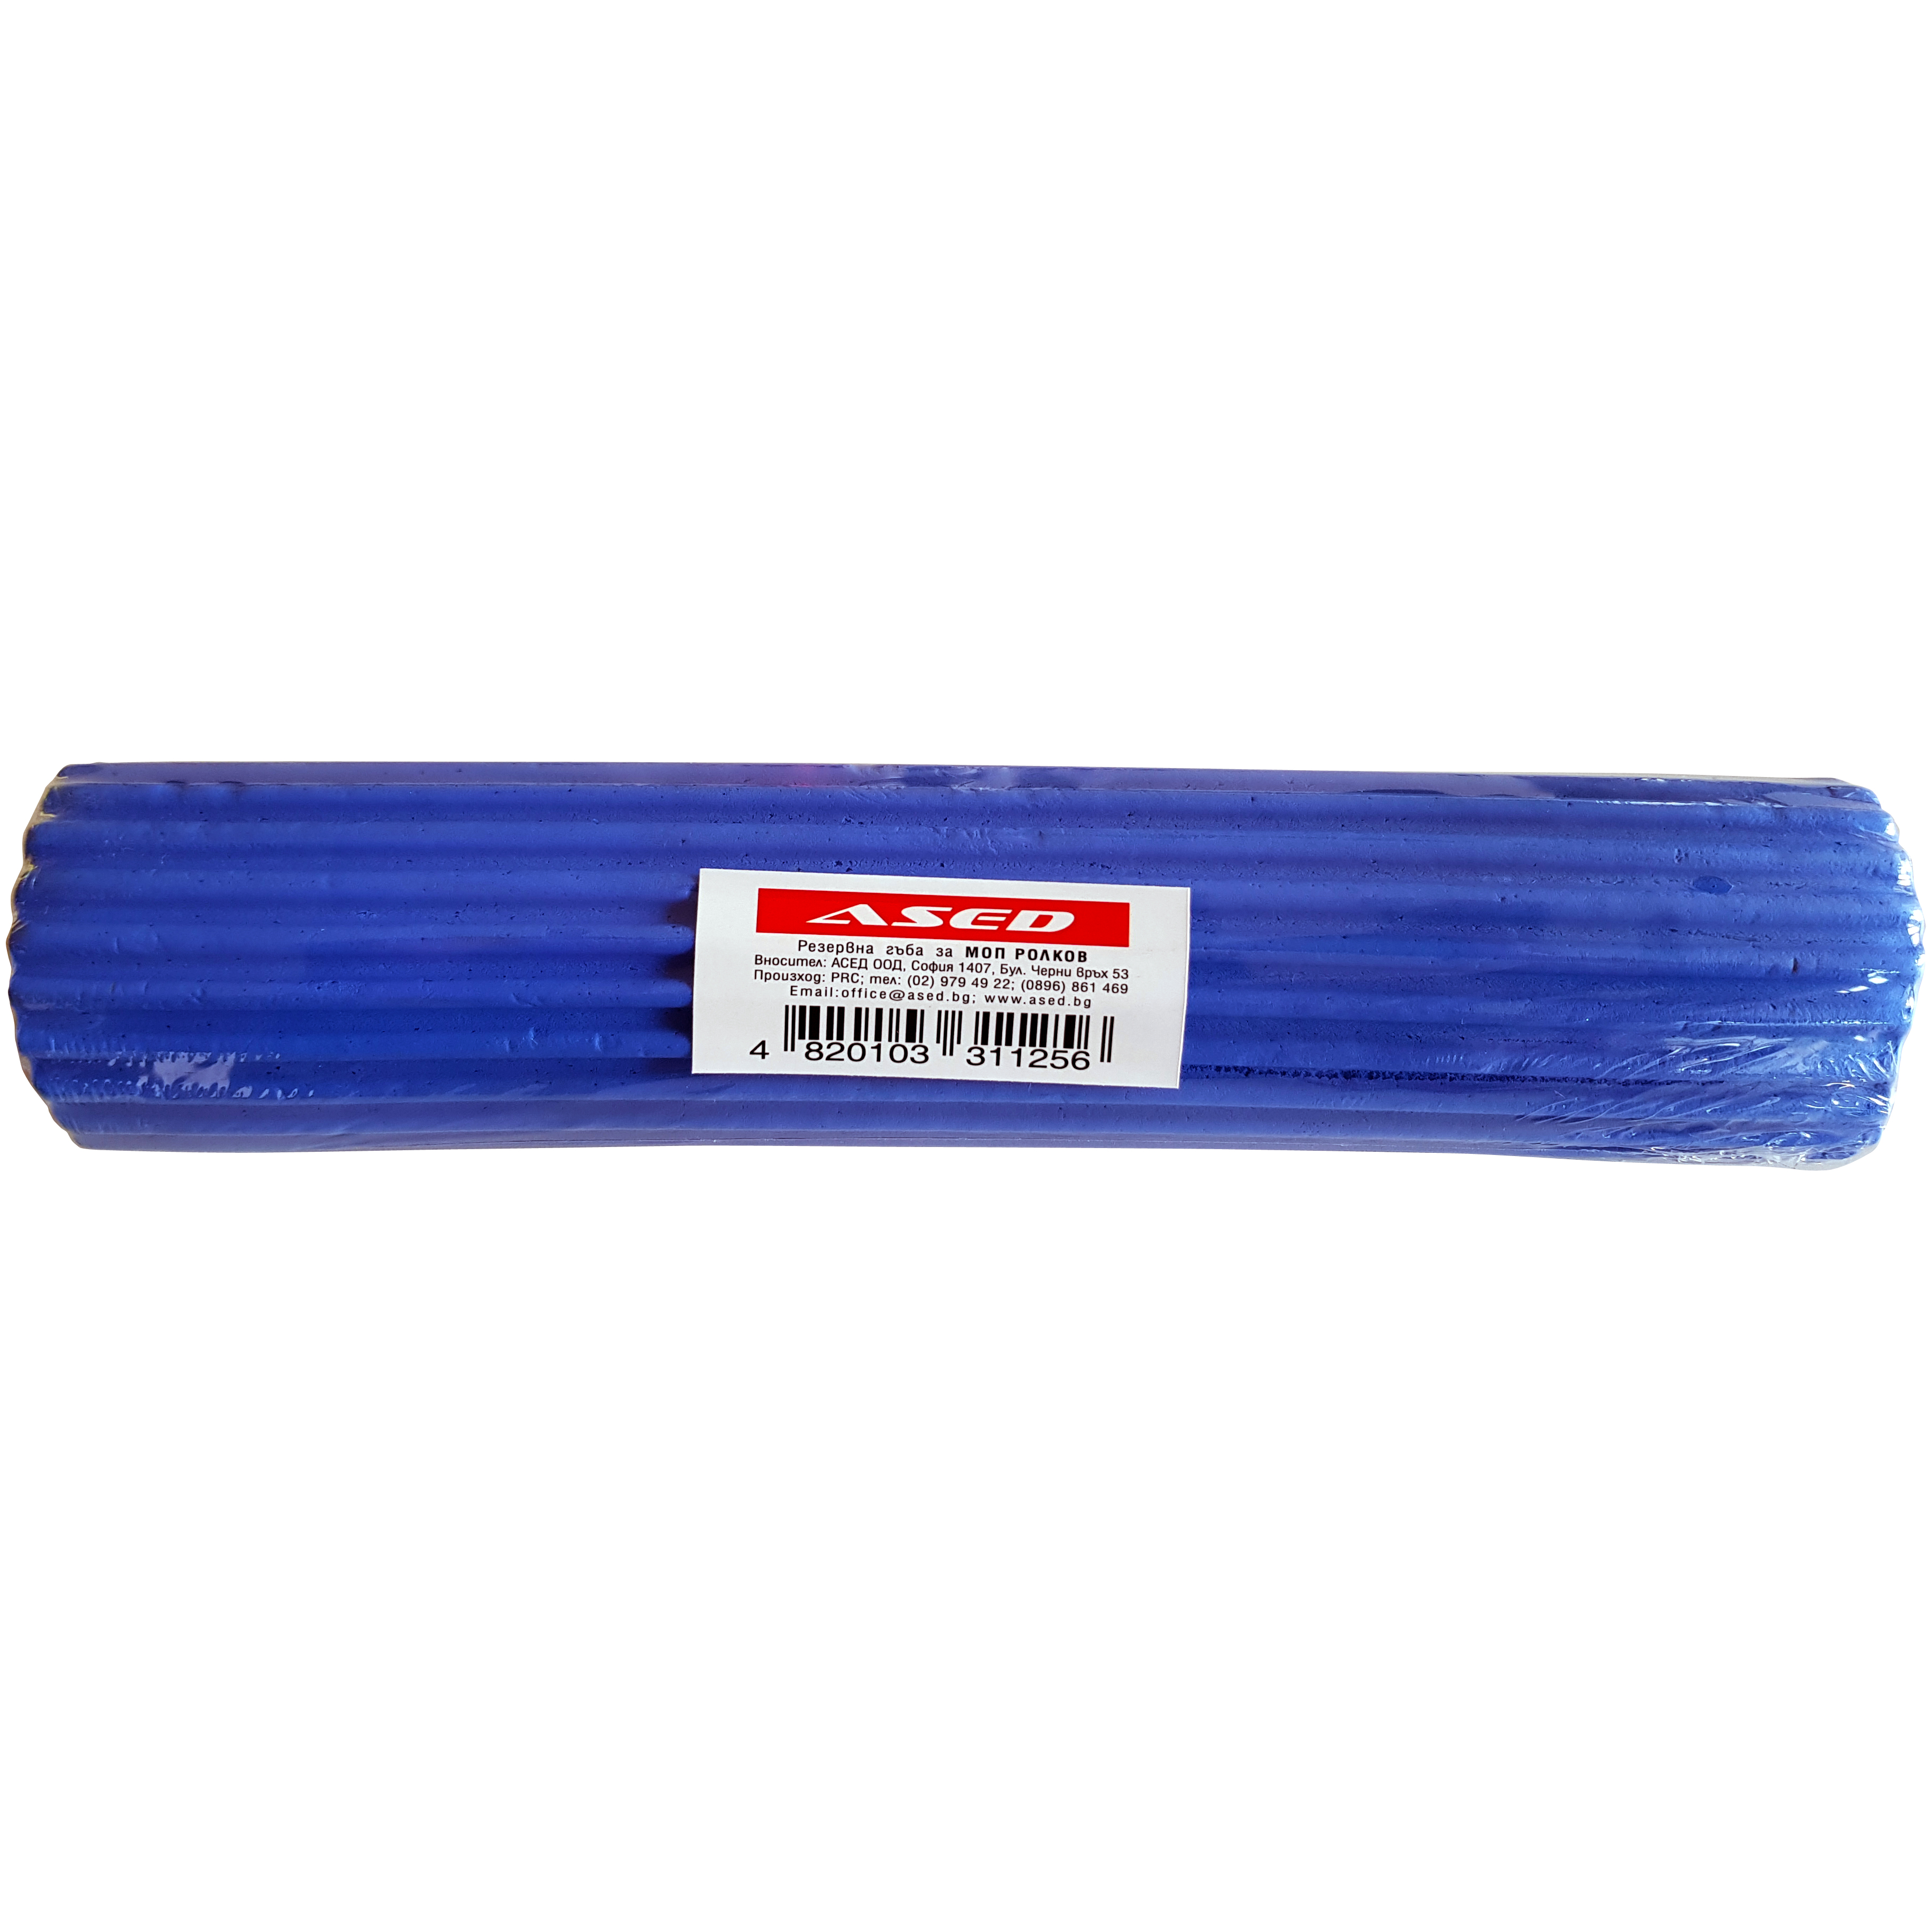 PVA refill for roller mop ASED